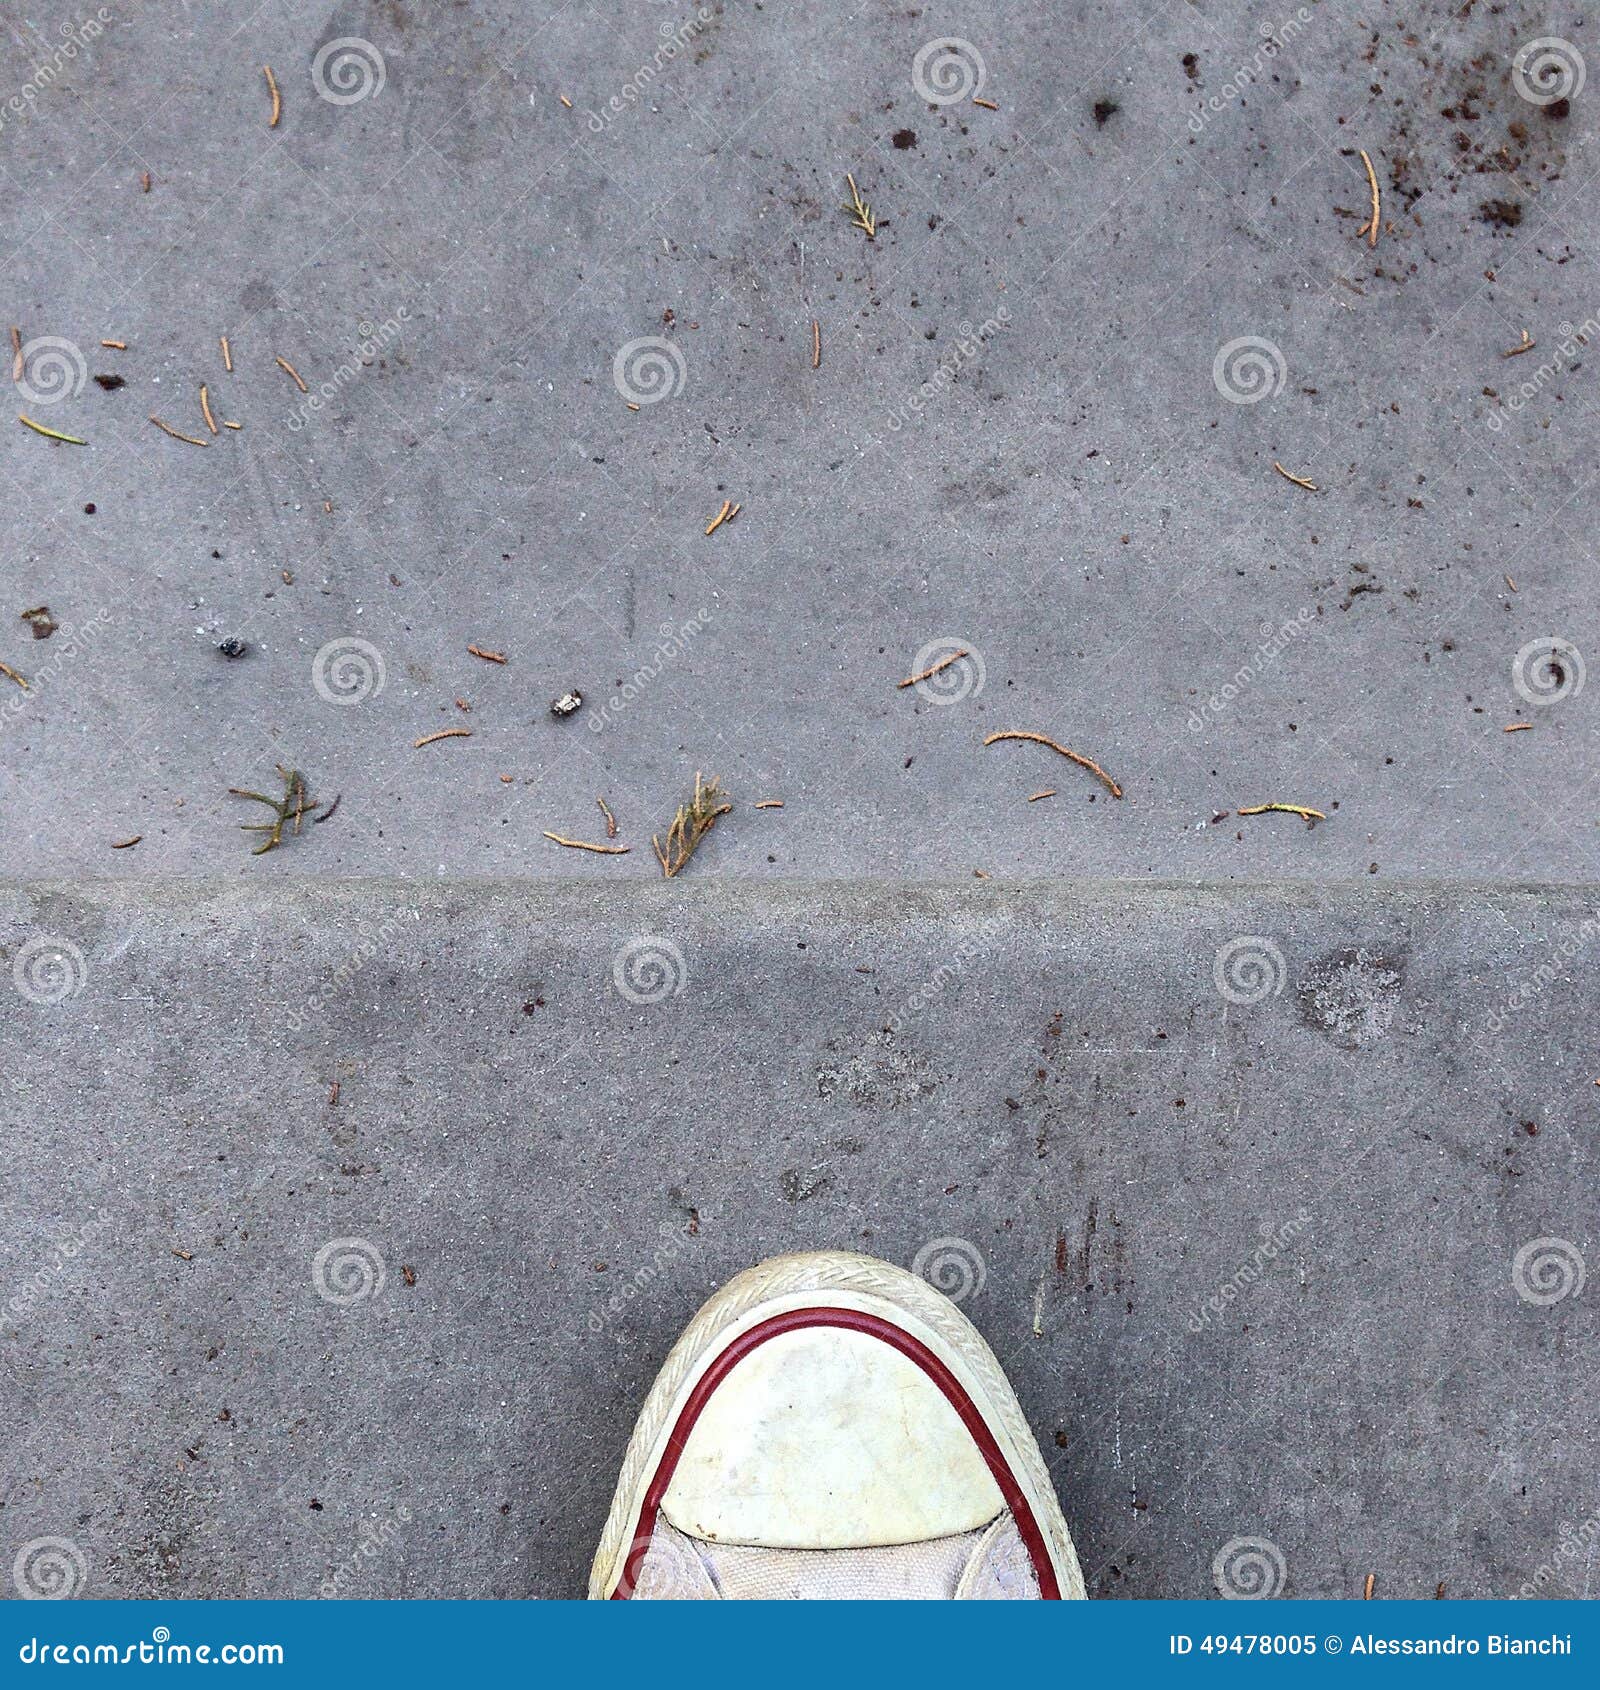 Toe of shoe on concrete stock image. Image of dirty, clutter - 49478005